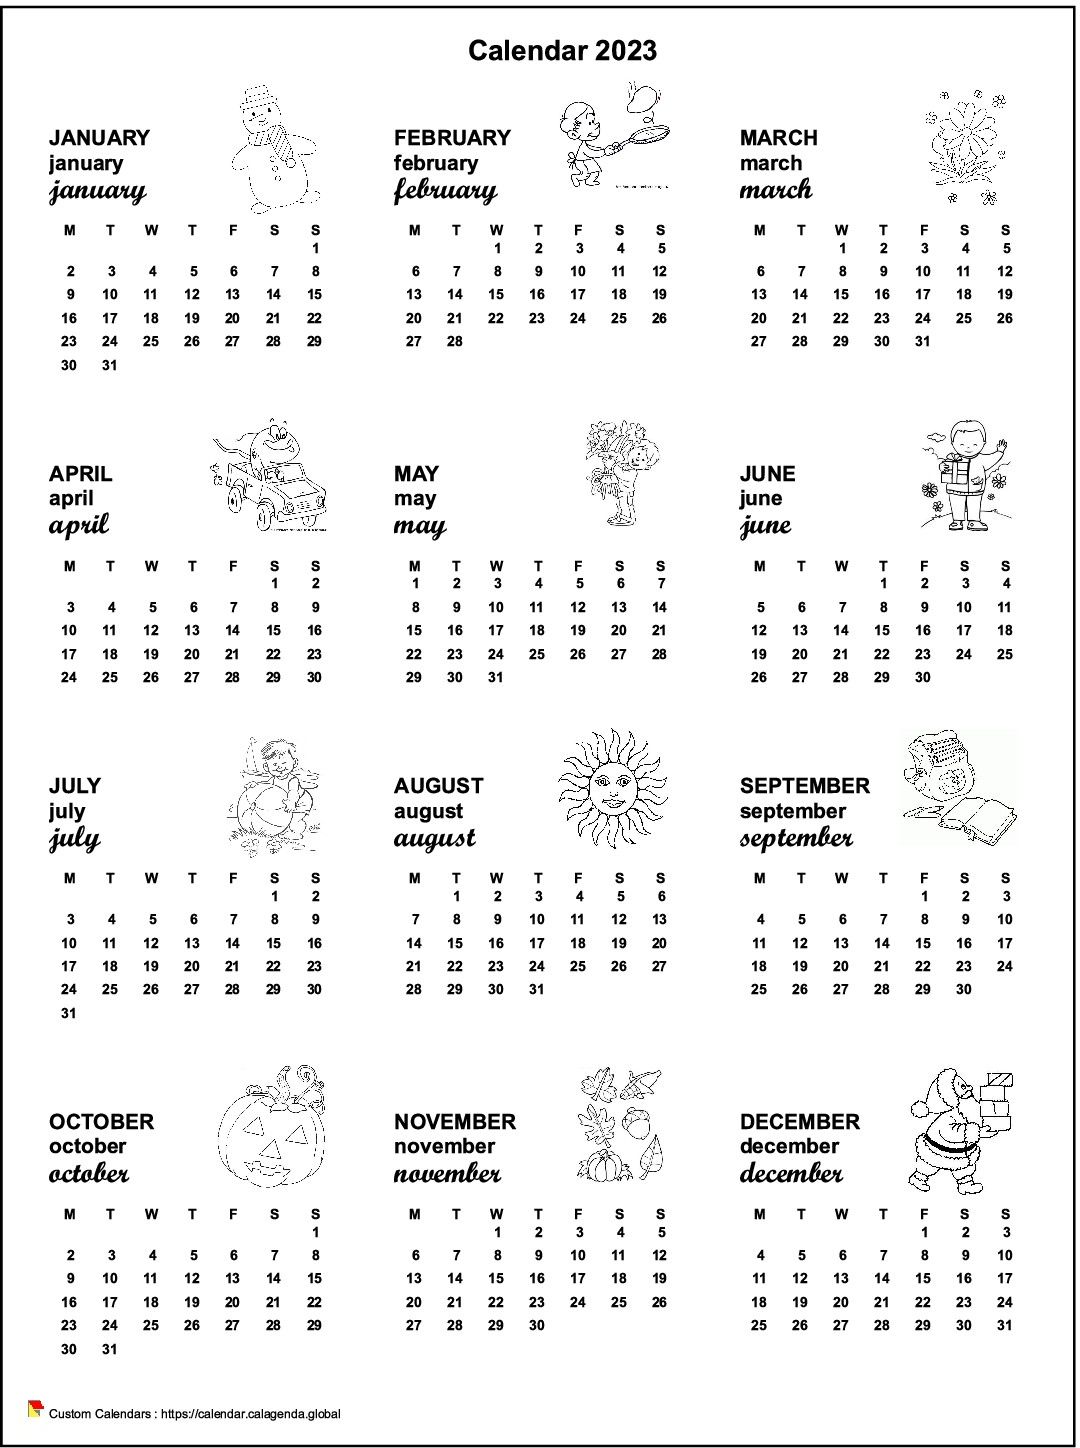 Calendar 2083 annual maternal and primary school